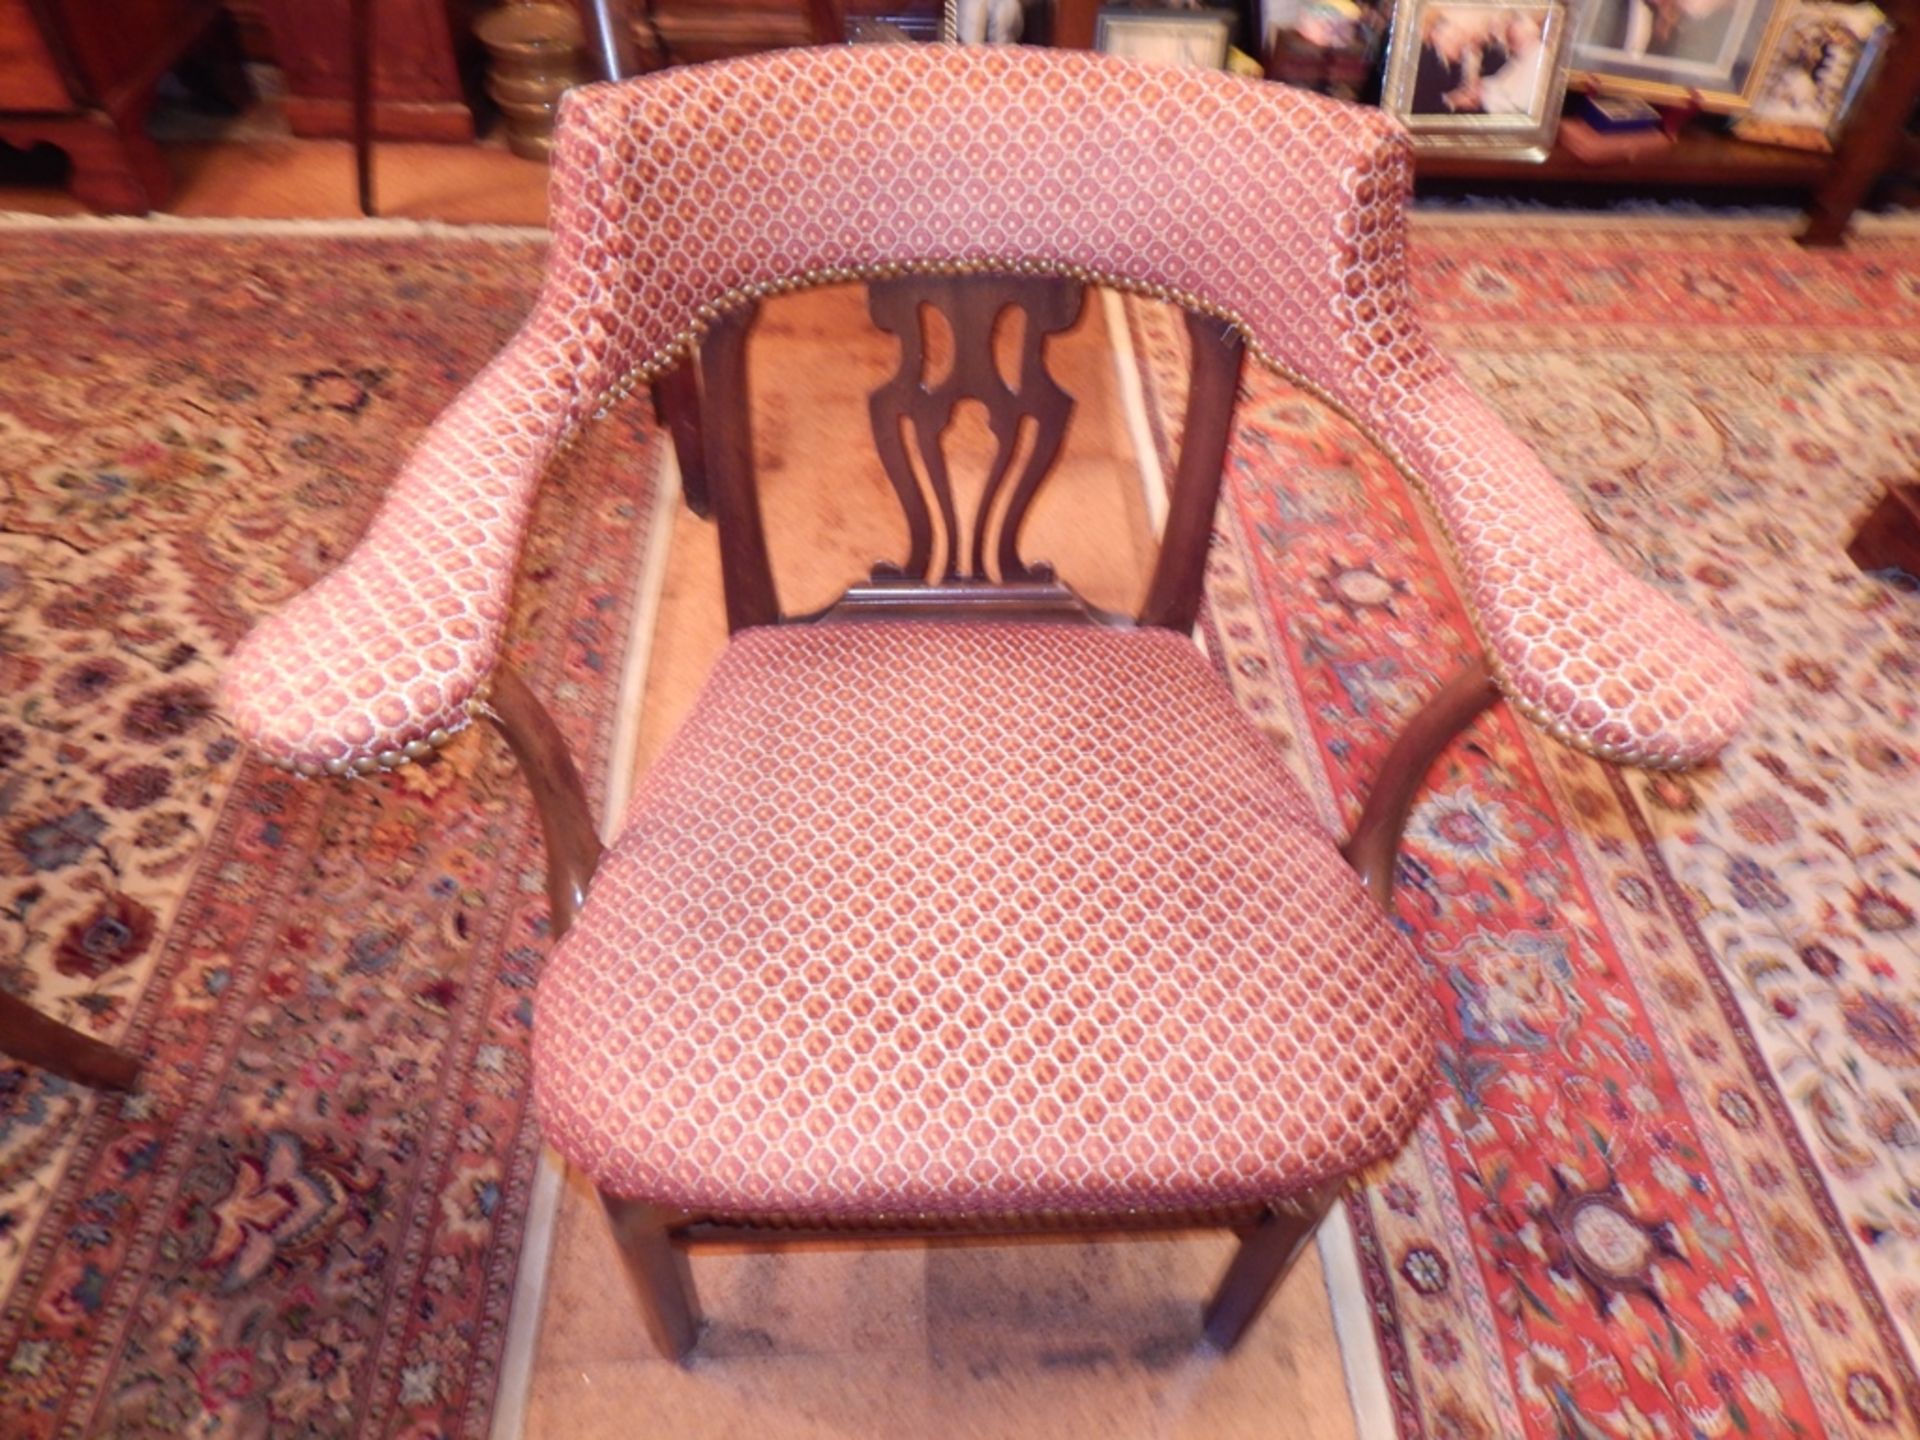 Mahogany Harp-Backed Chairs, possibly Chippendale